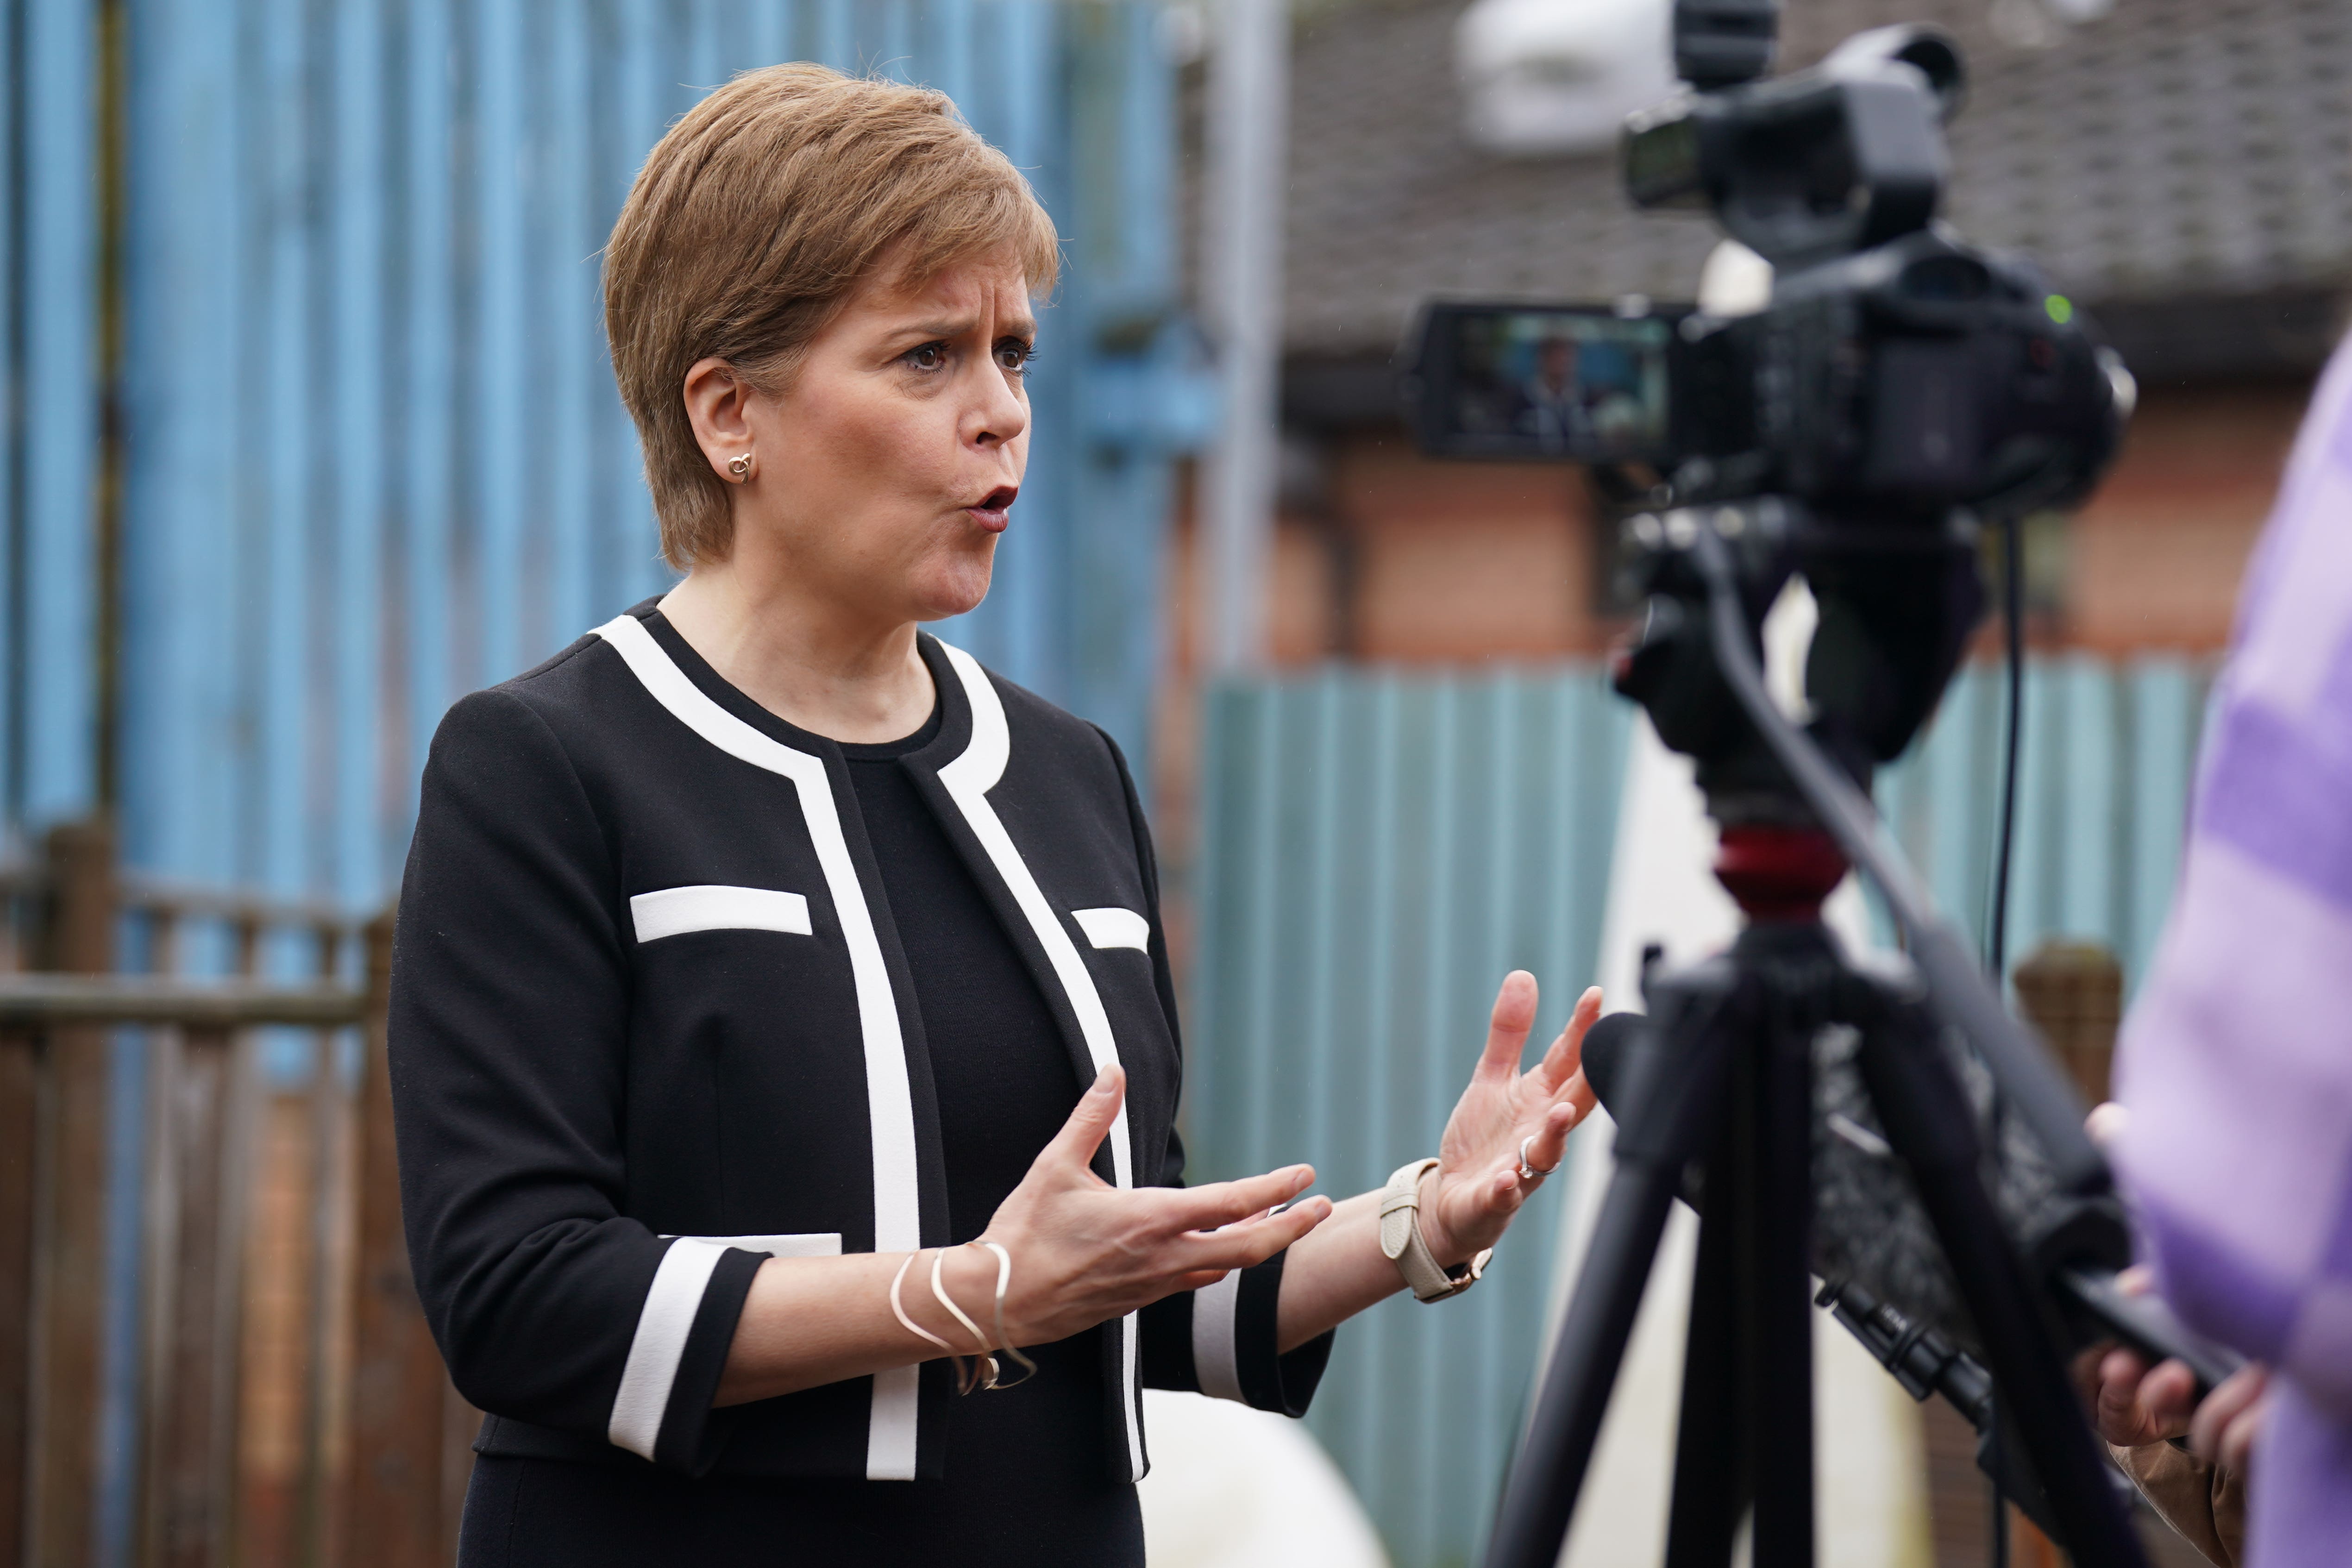 Nicola Sturgeon urged the new Tory leader to rule out austerity and call a new election (Andrew Milligan/PA)